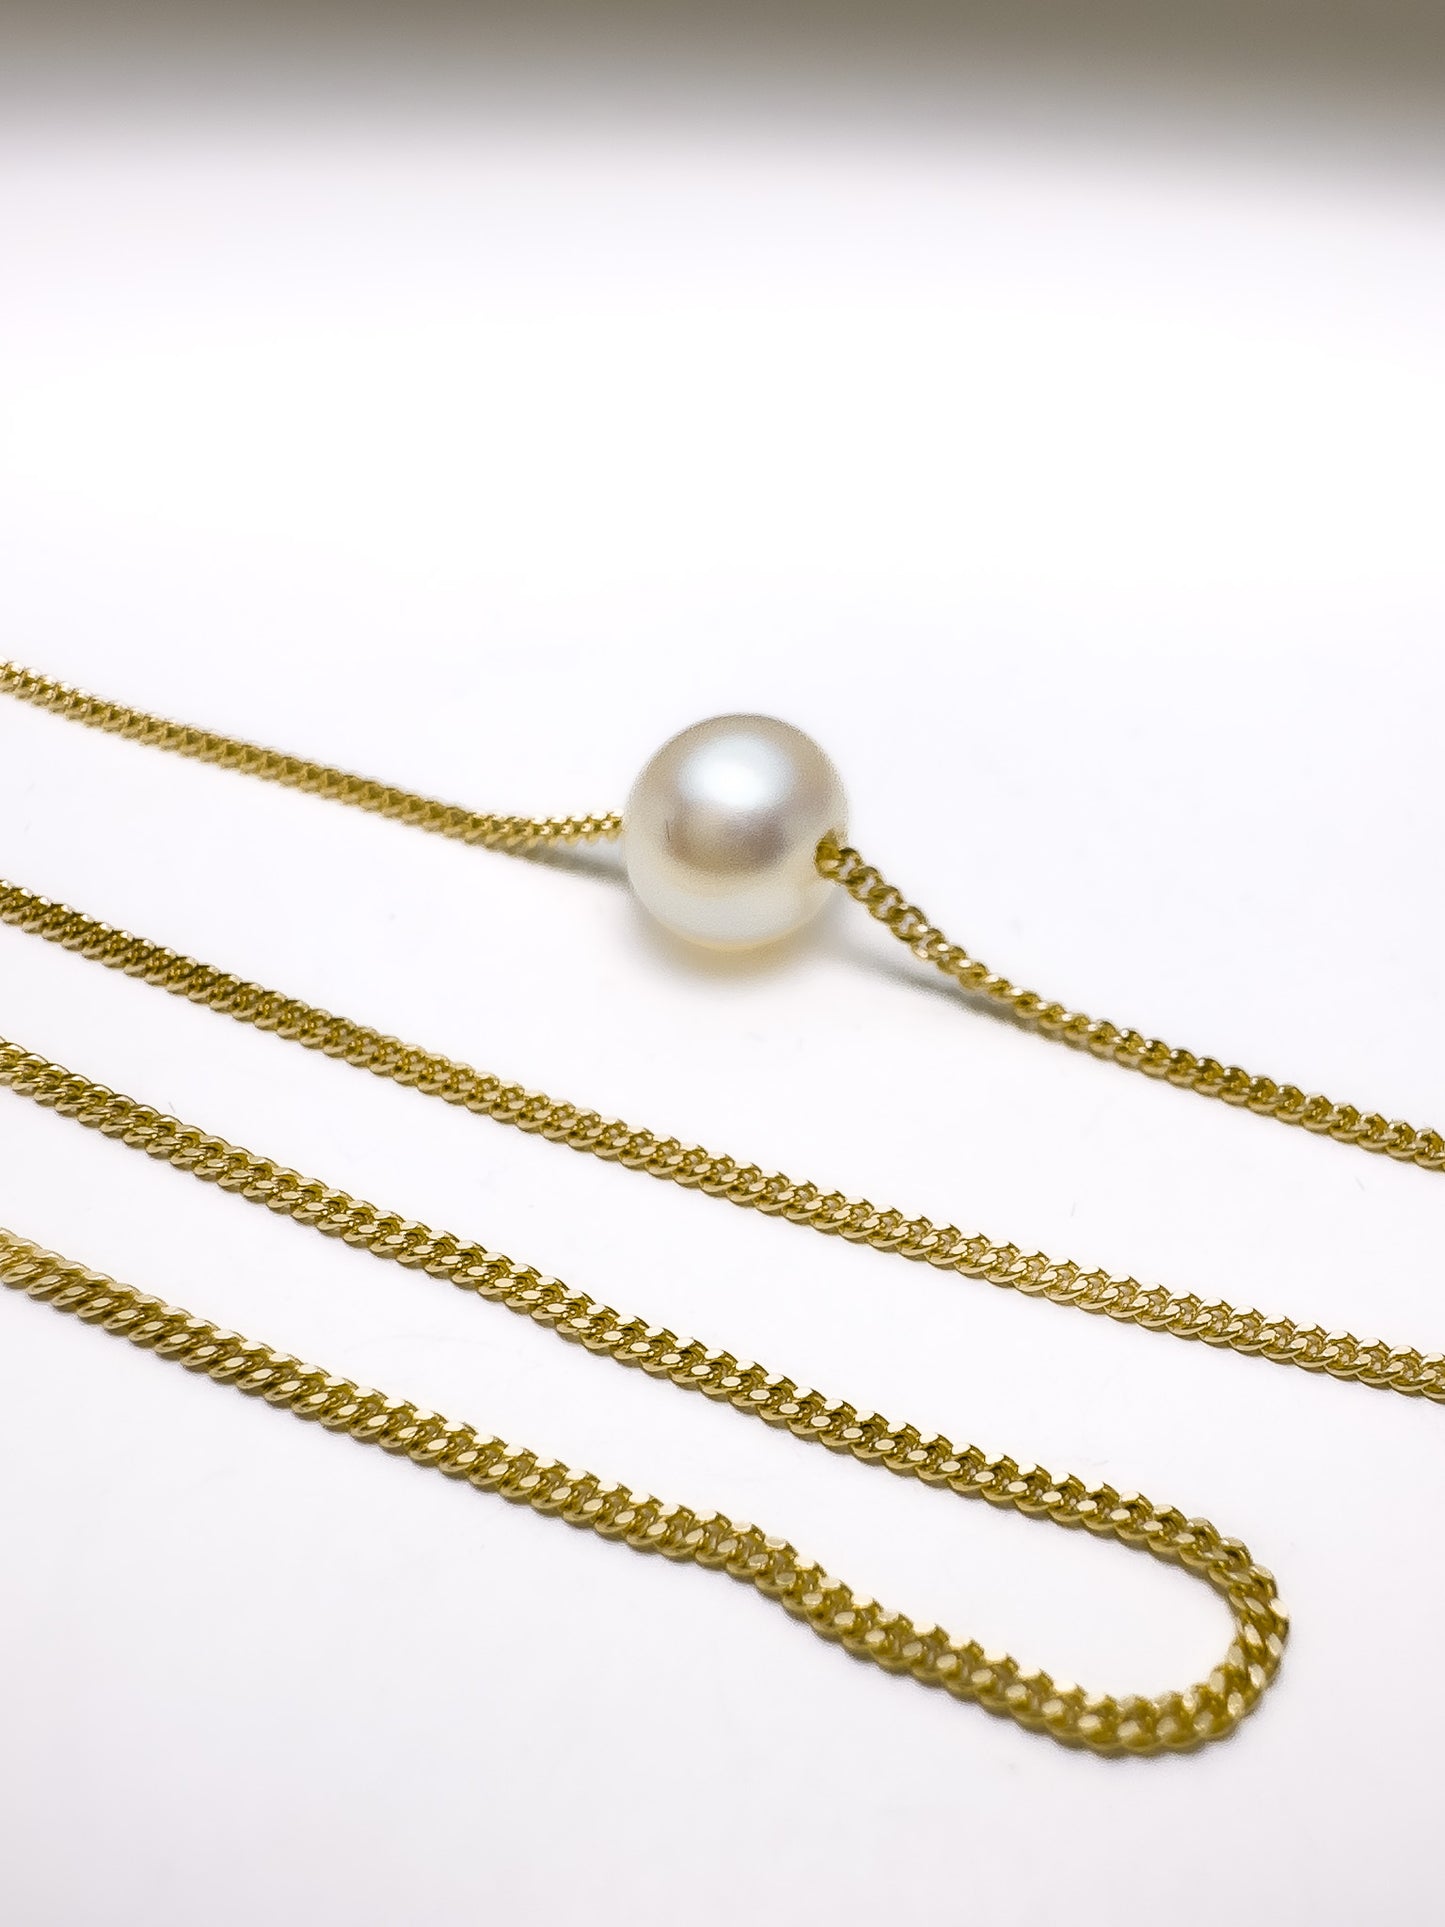 9ct. Gold Dainty Pearl Necklace